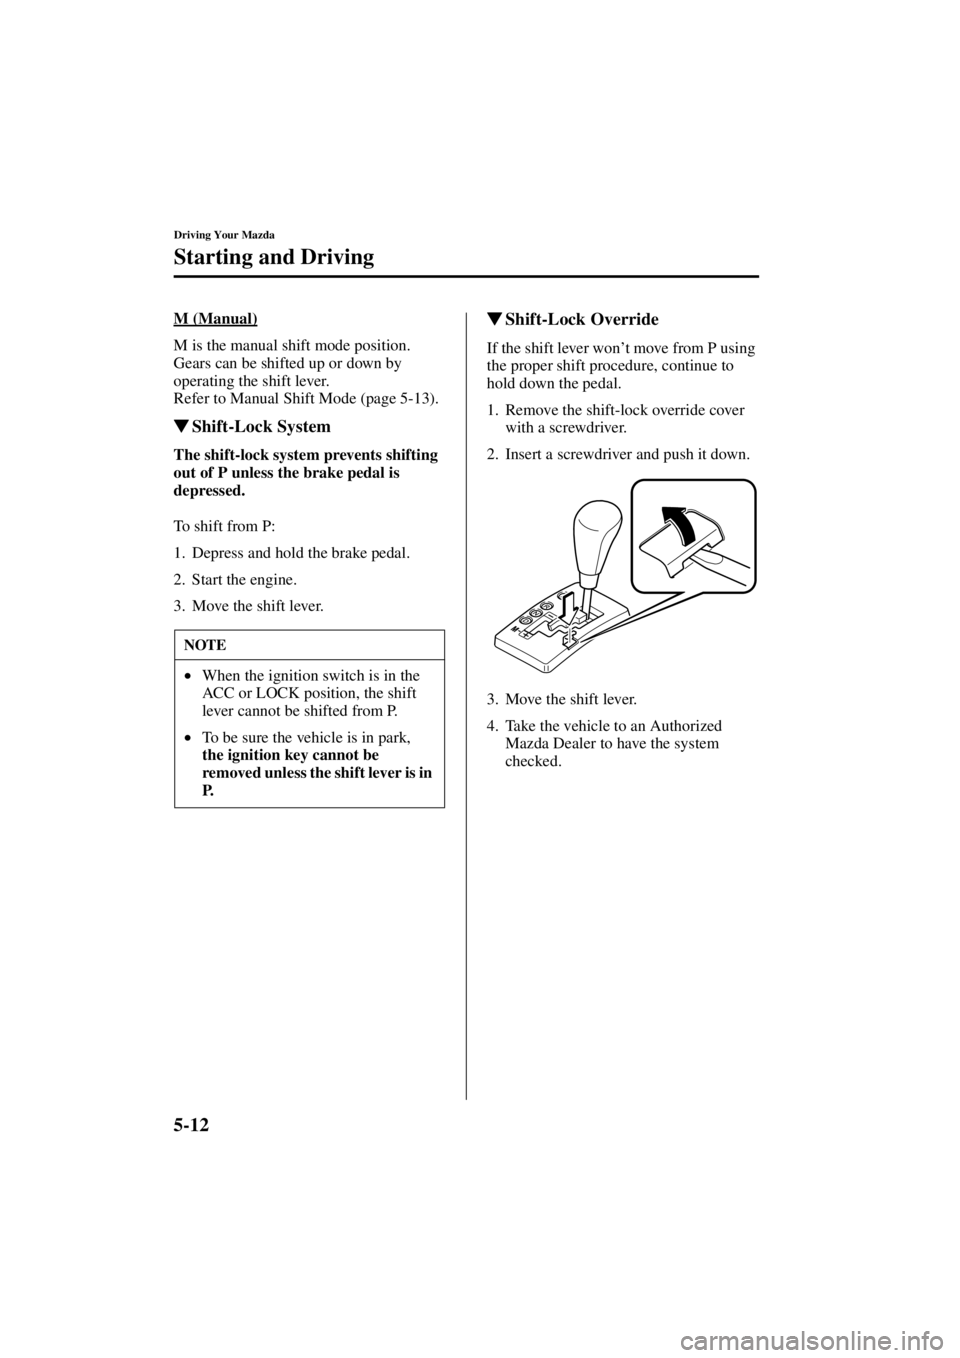 MAZDA MODEL 3 4-DOOR 2004  Owners Manual 5-12
Driving Your Mazda
Starting and Driving
Form No. 8S18-EA-03I
M (Manual)
M is the manual shift mode position. 
Gears can be shifted up or down by 
operating the shift lever.
Refer to Manual Shift 